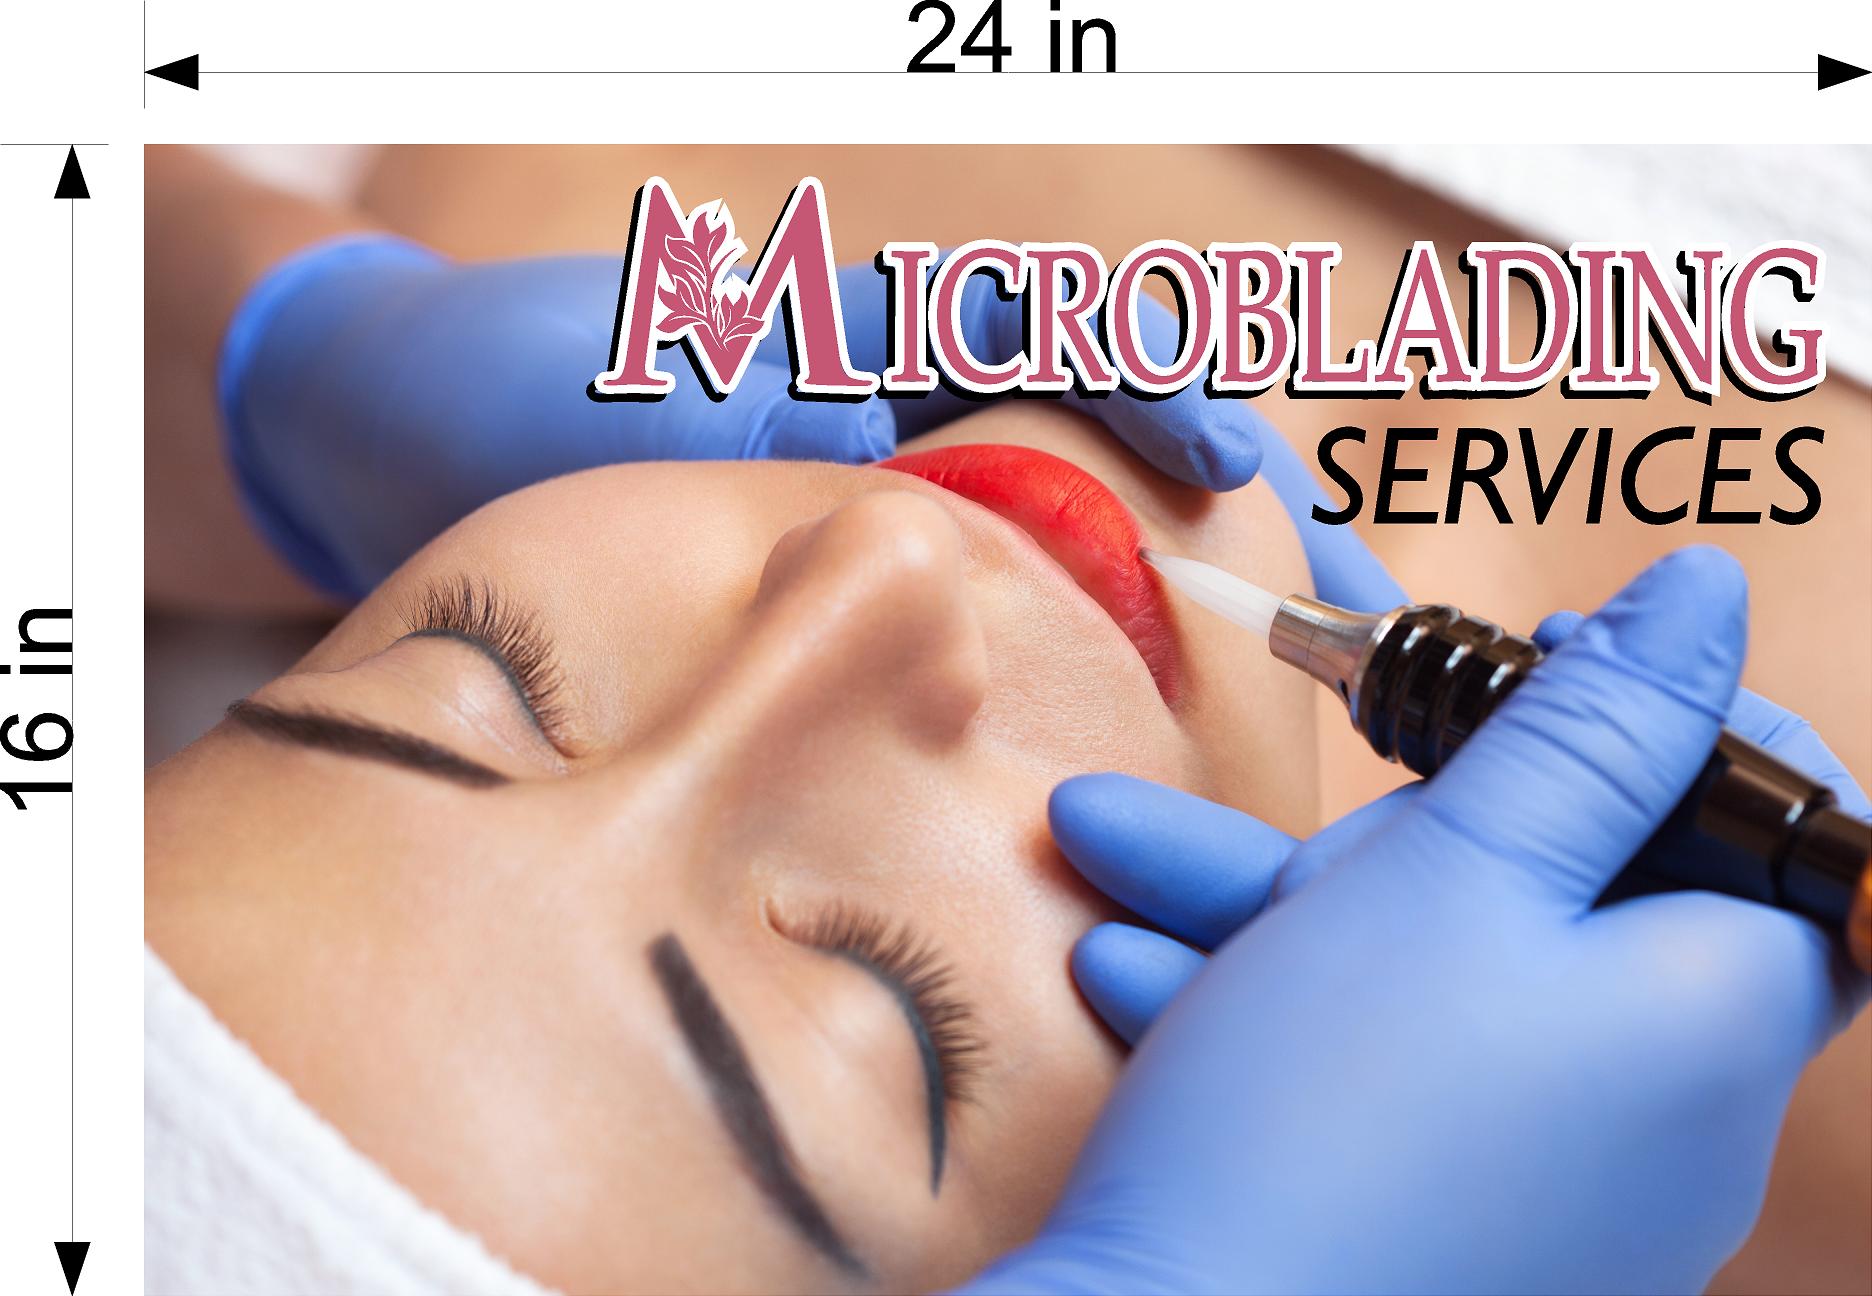 Microblading 18 Perforated Mesh One Way Vision See-Through Window Vinyl Salon Services Permanent Makeup Tattoo Horizontal